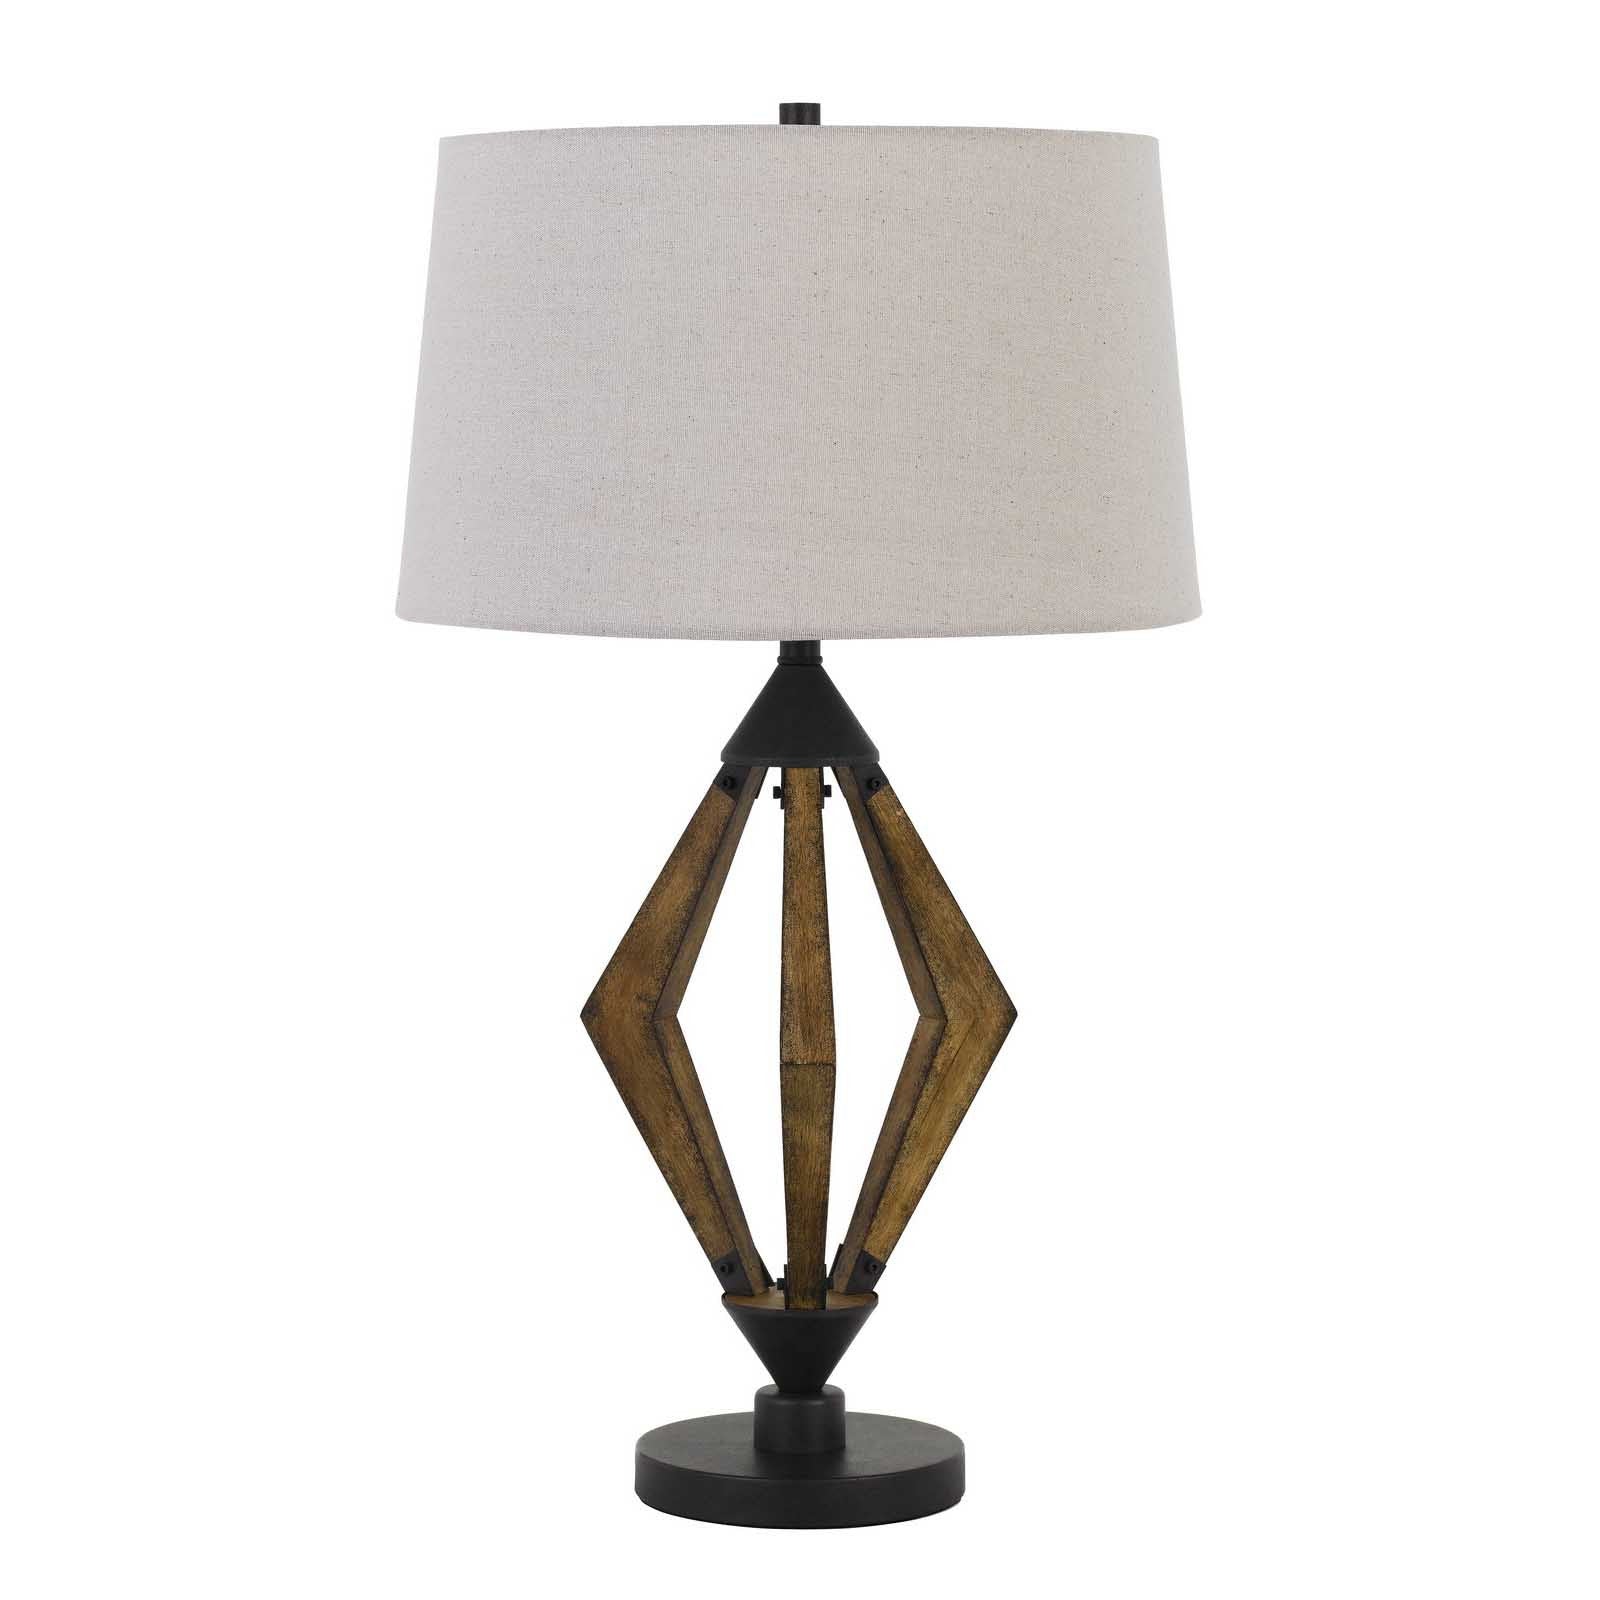 30" Black Metal Table Lamp With Brown Empire Shade